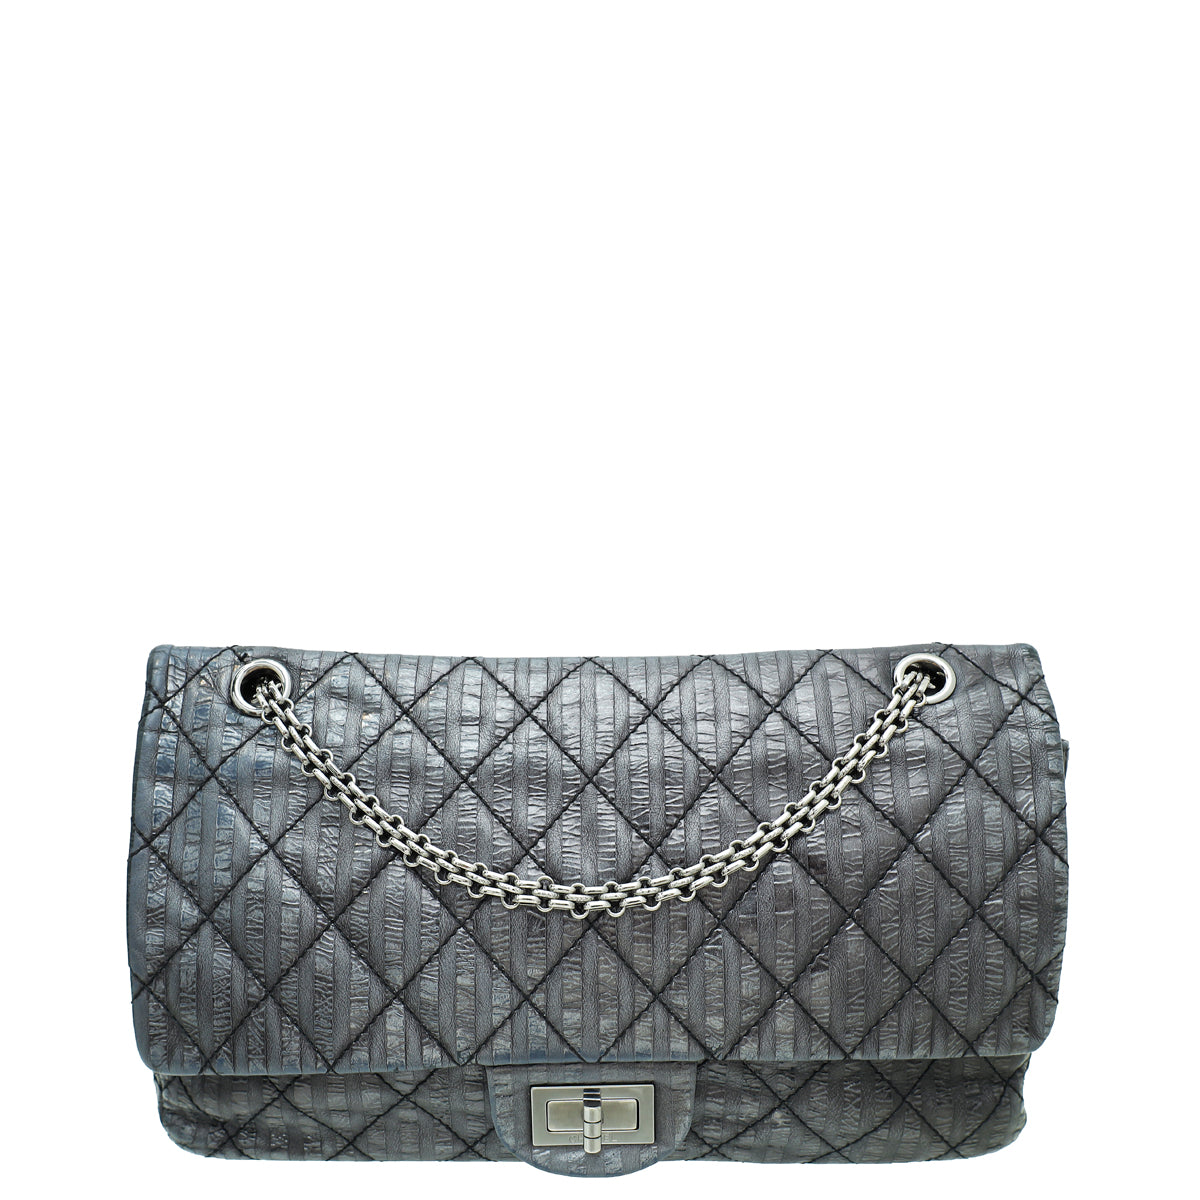 Chanel Dark Grey Reissue 2.55 Stripped Double Flap 227 Bag – The